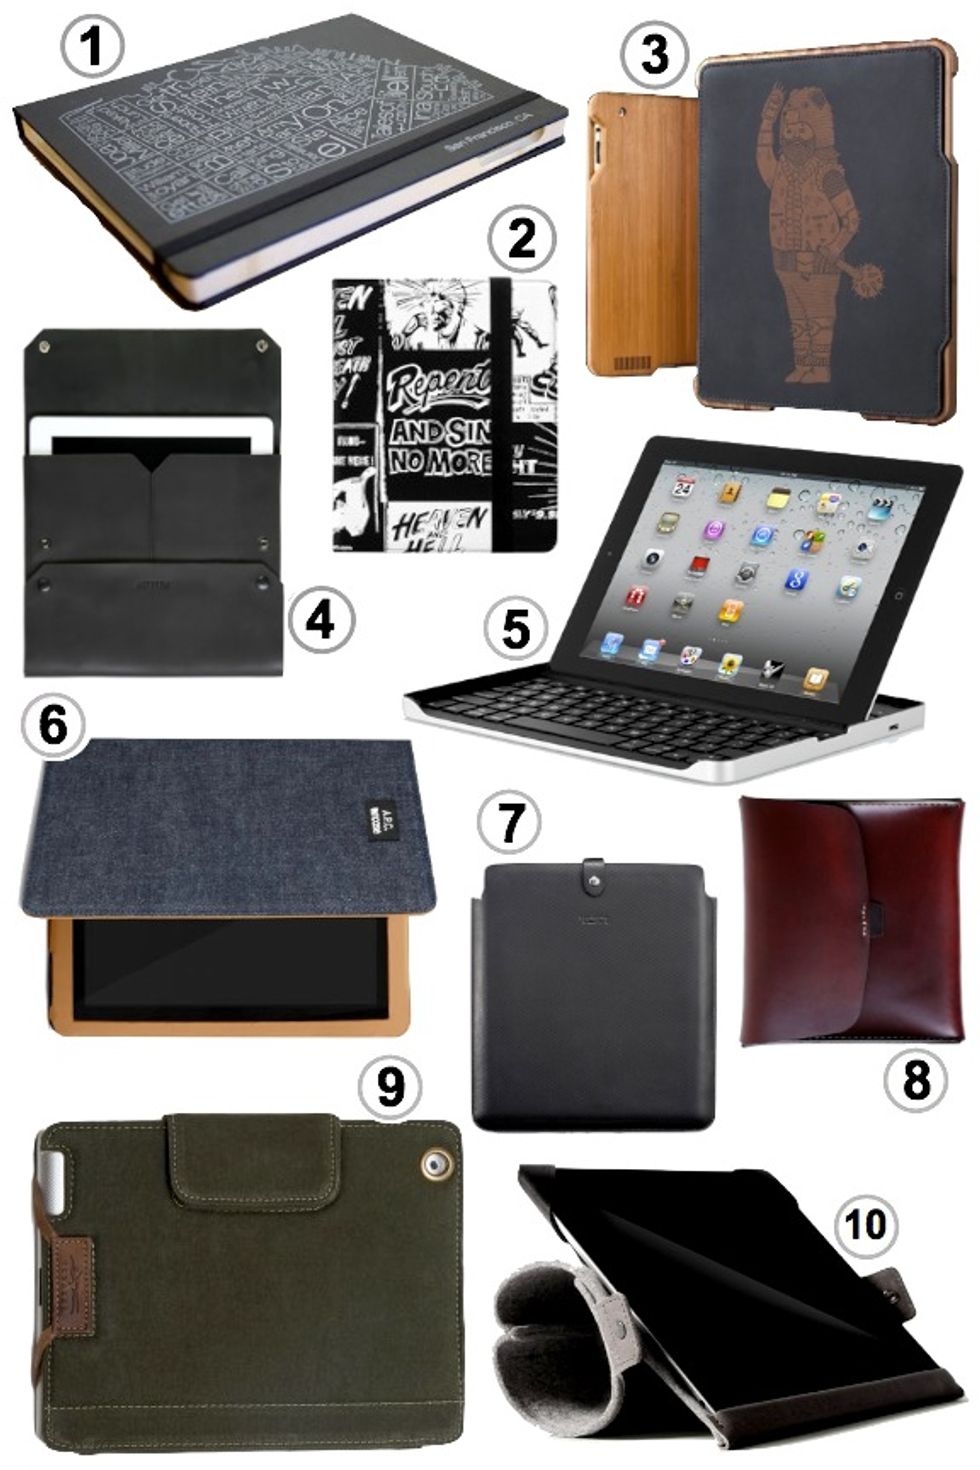 Men's Look of the Week: 10 Ultra Manly iPad + Tablet Cases